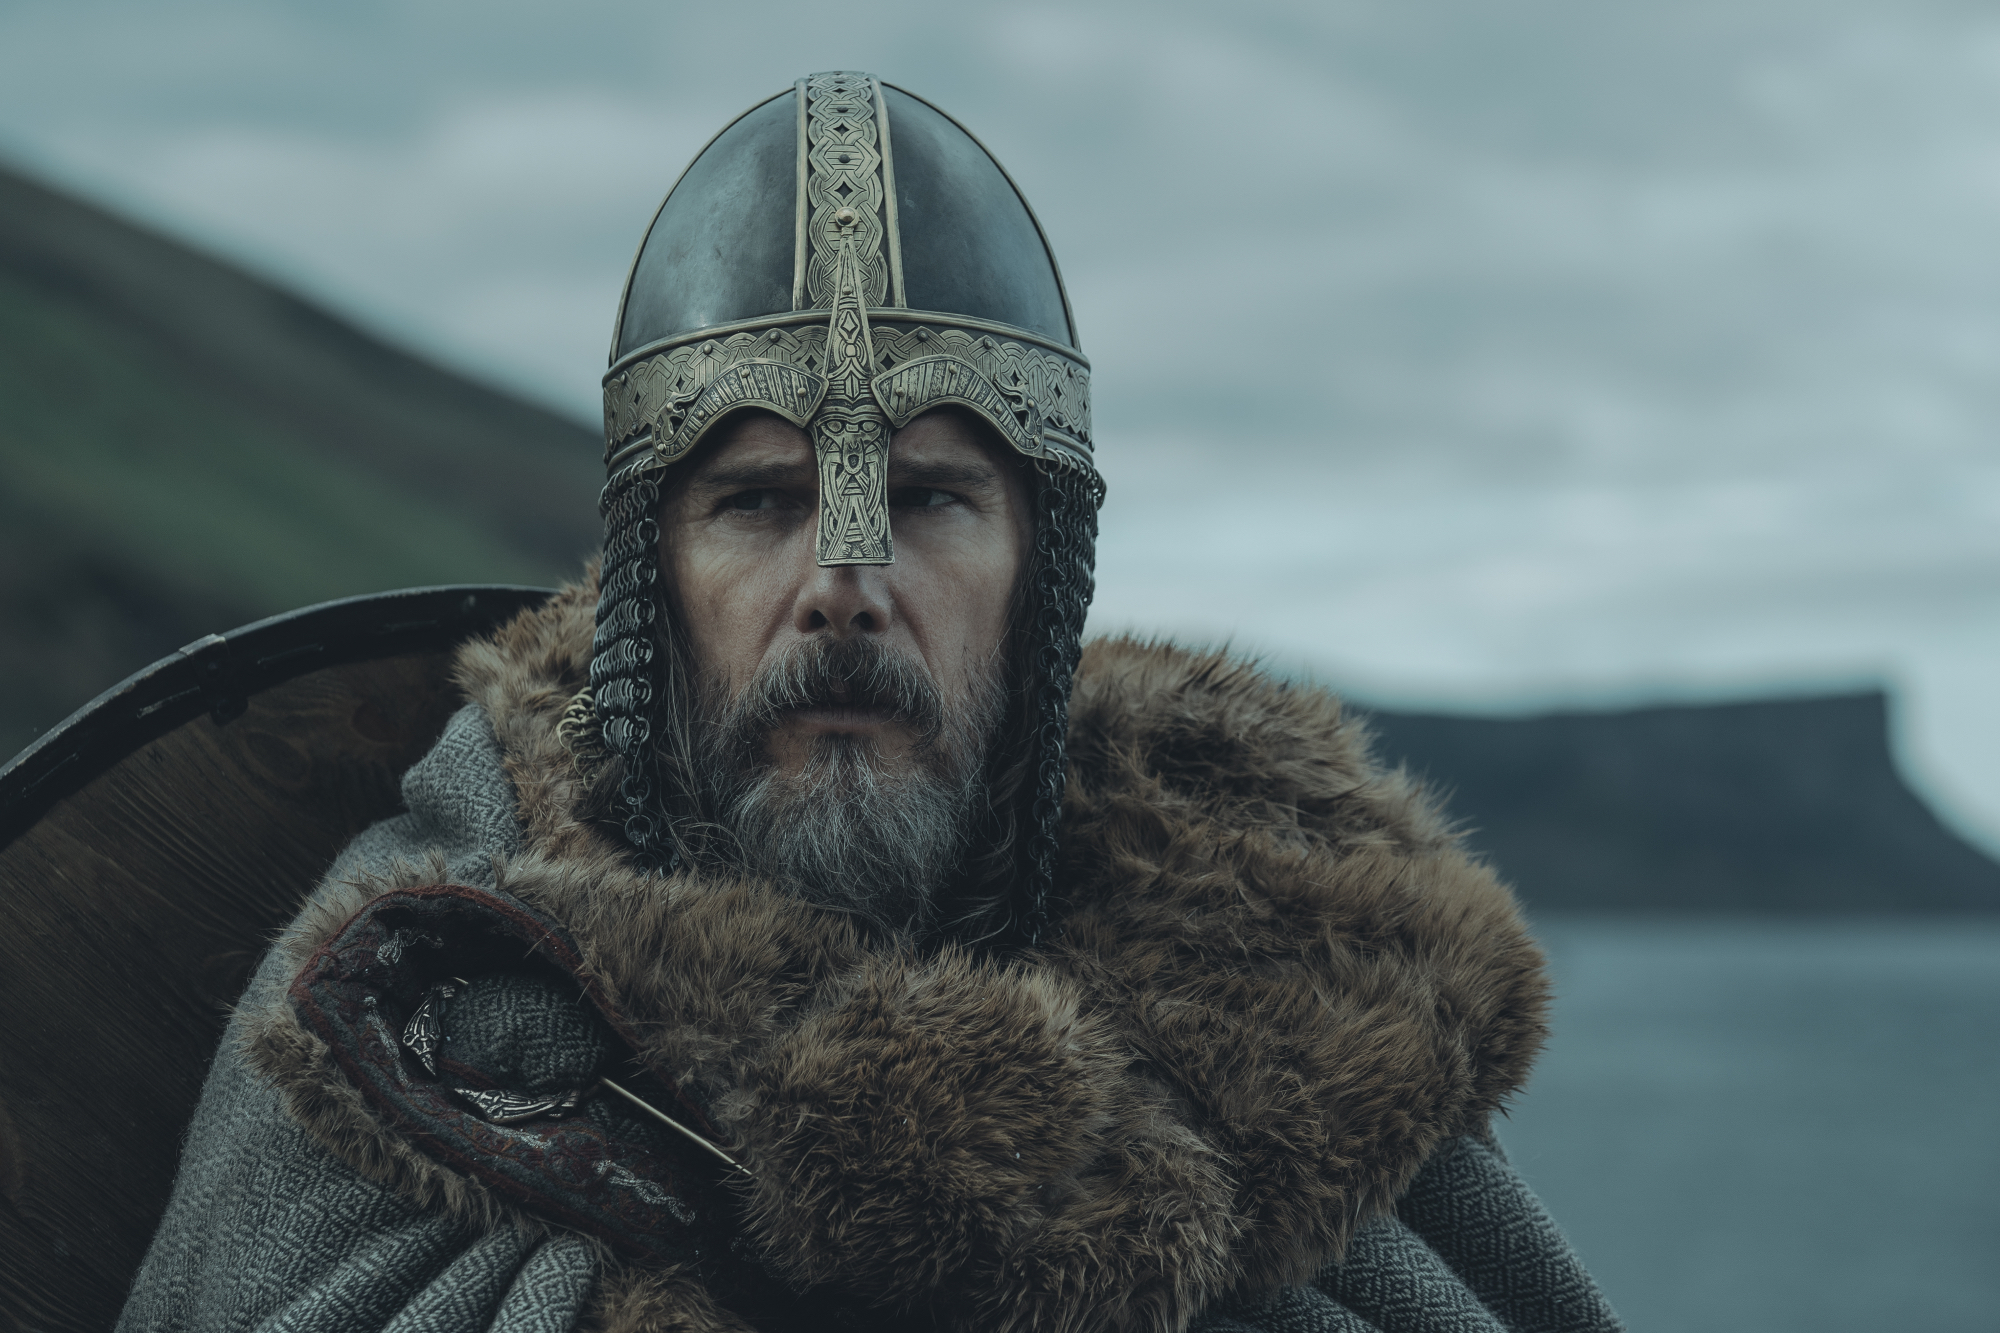 'The Northman' Ethan Hawke as King Aurvandil War-Raven wearing a helmet and coat in front of a mountain and ocean landscape